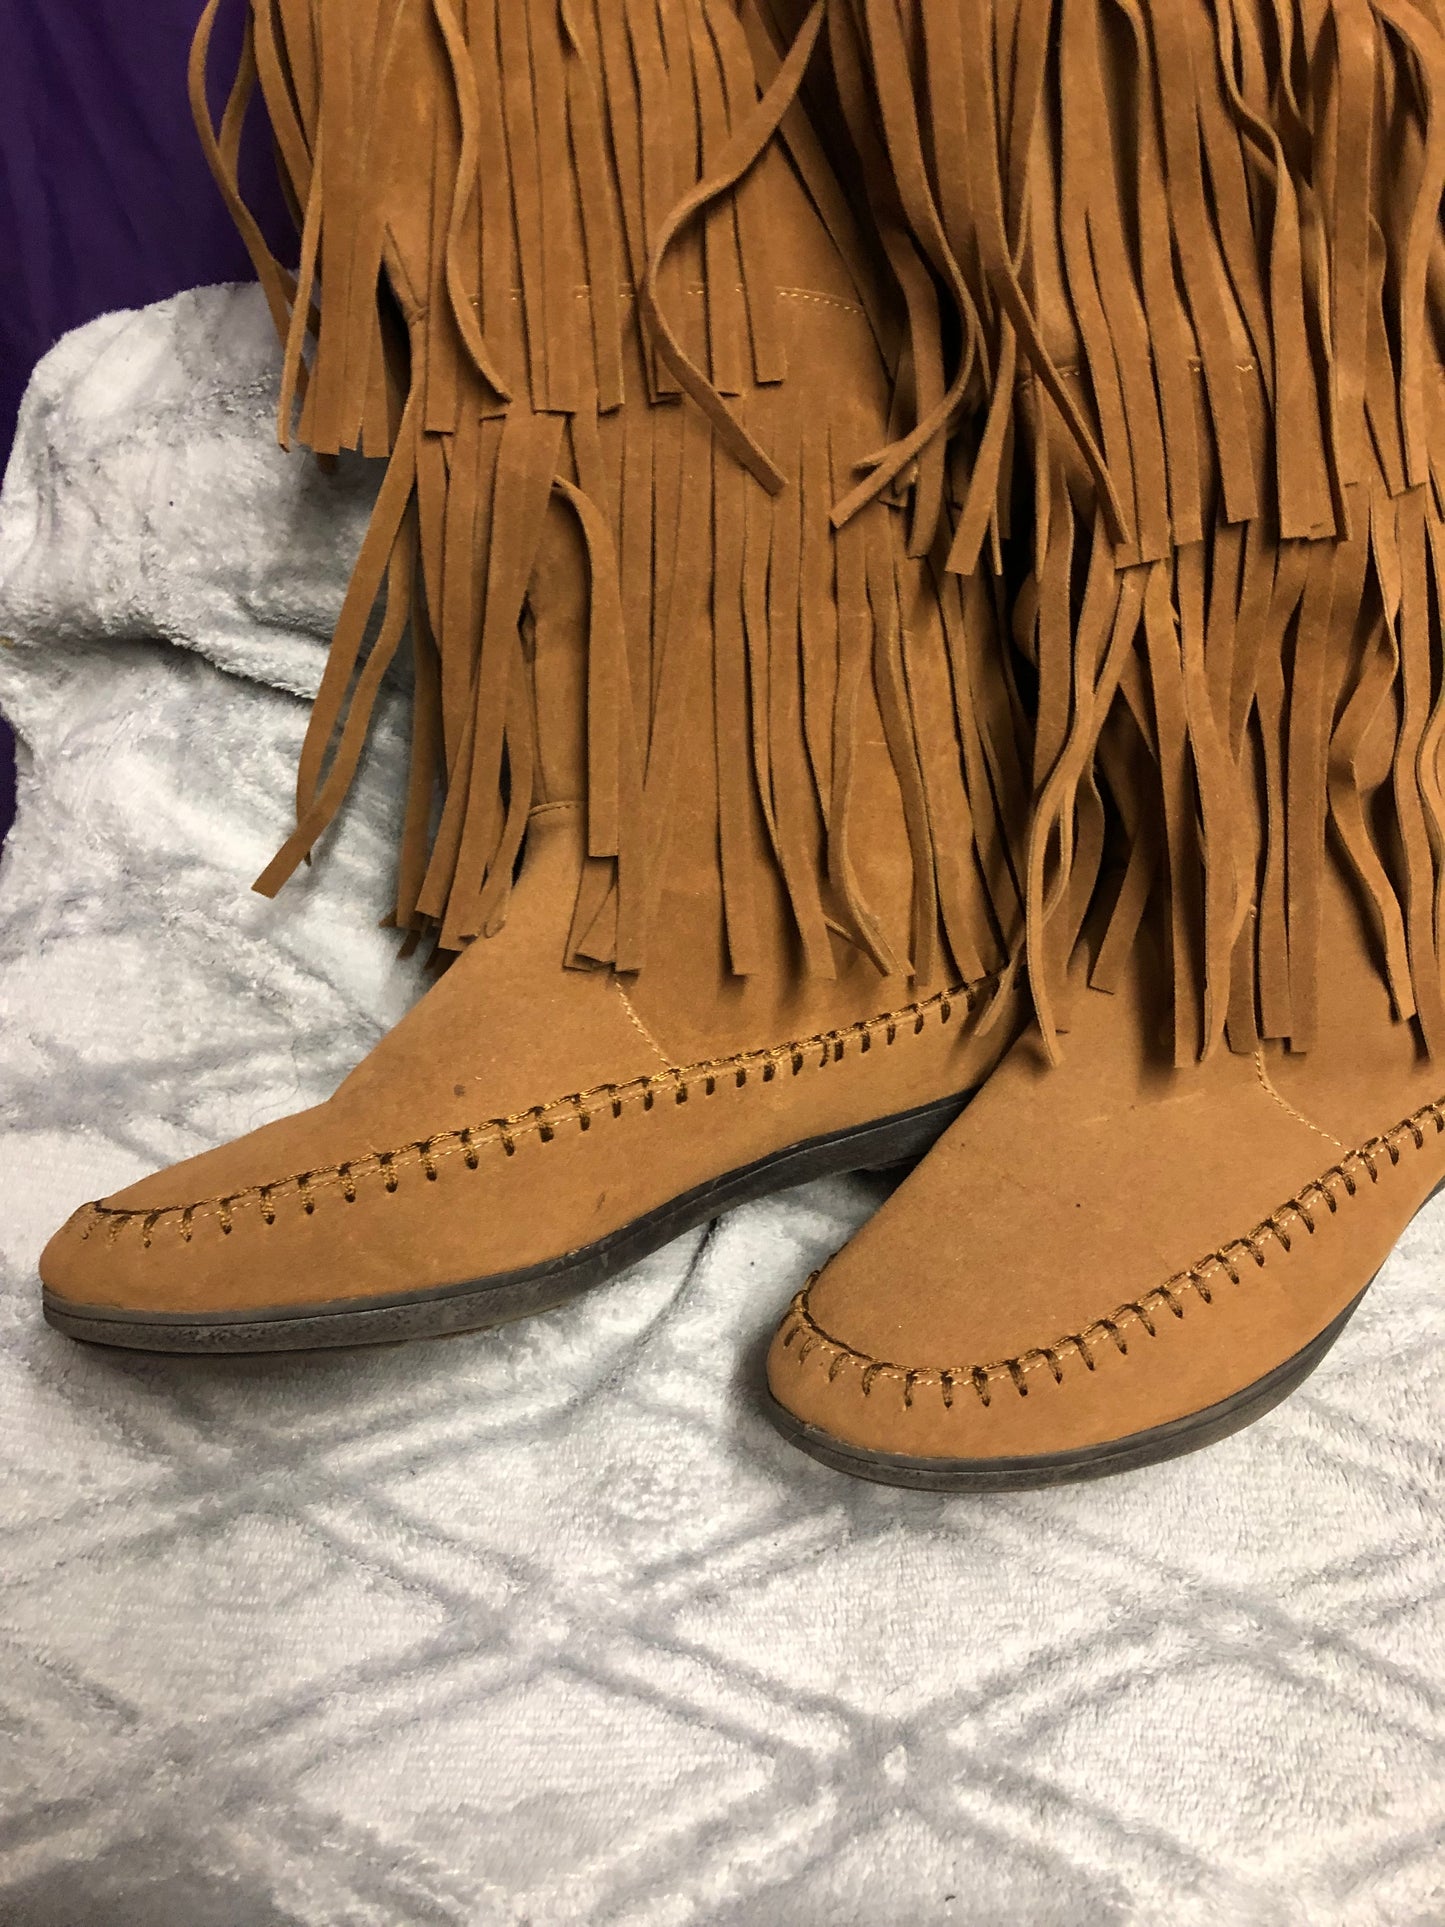 Woman Fringe Boots HLO Mid Calf By: Rampage Color Light Brown(Chest-nut)Size 9.5M